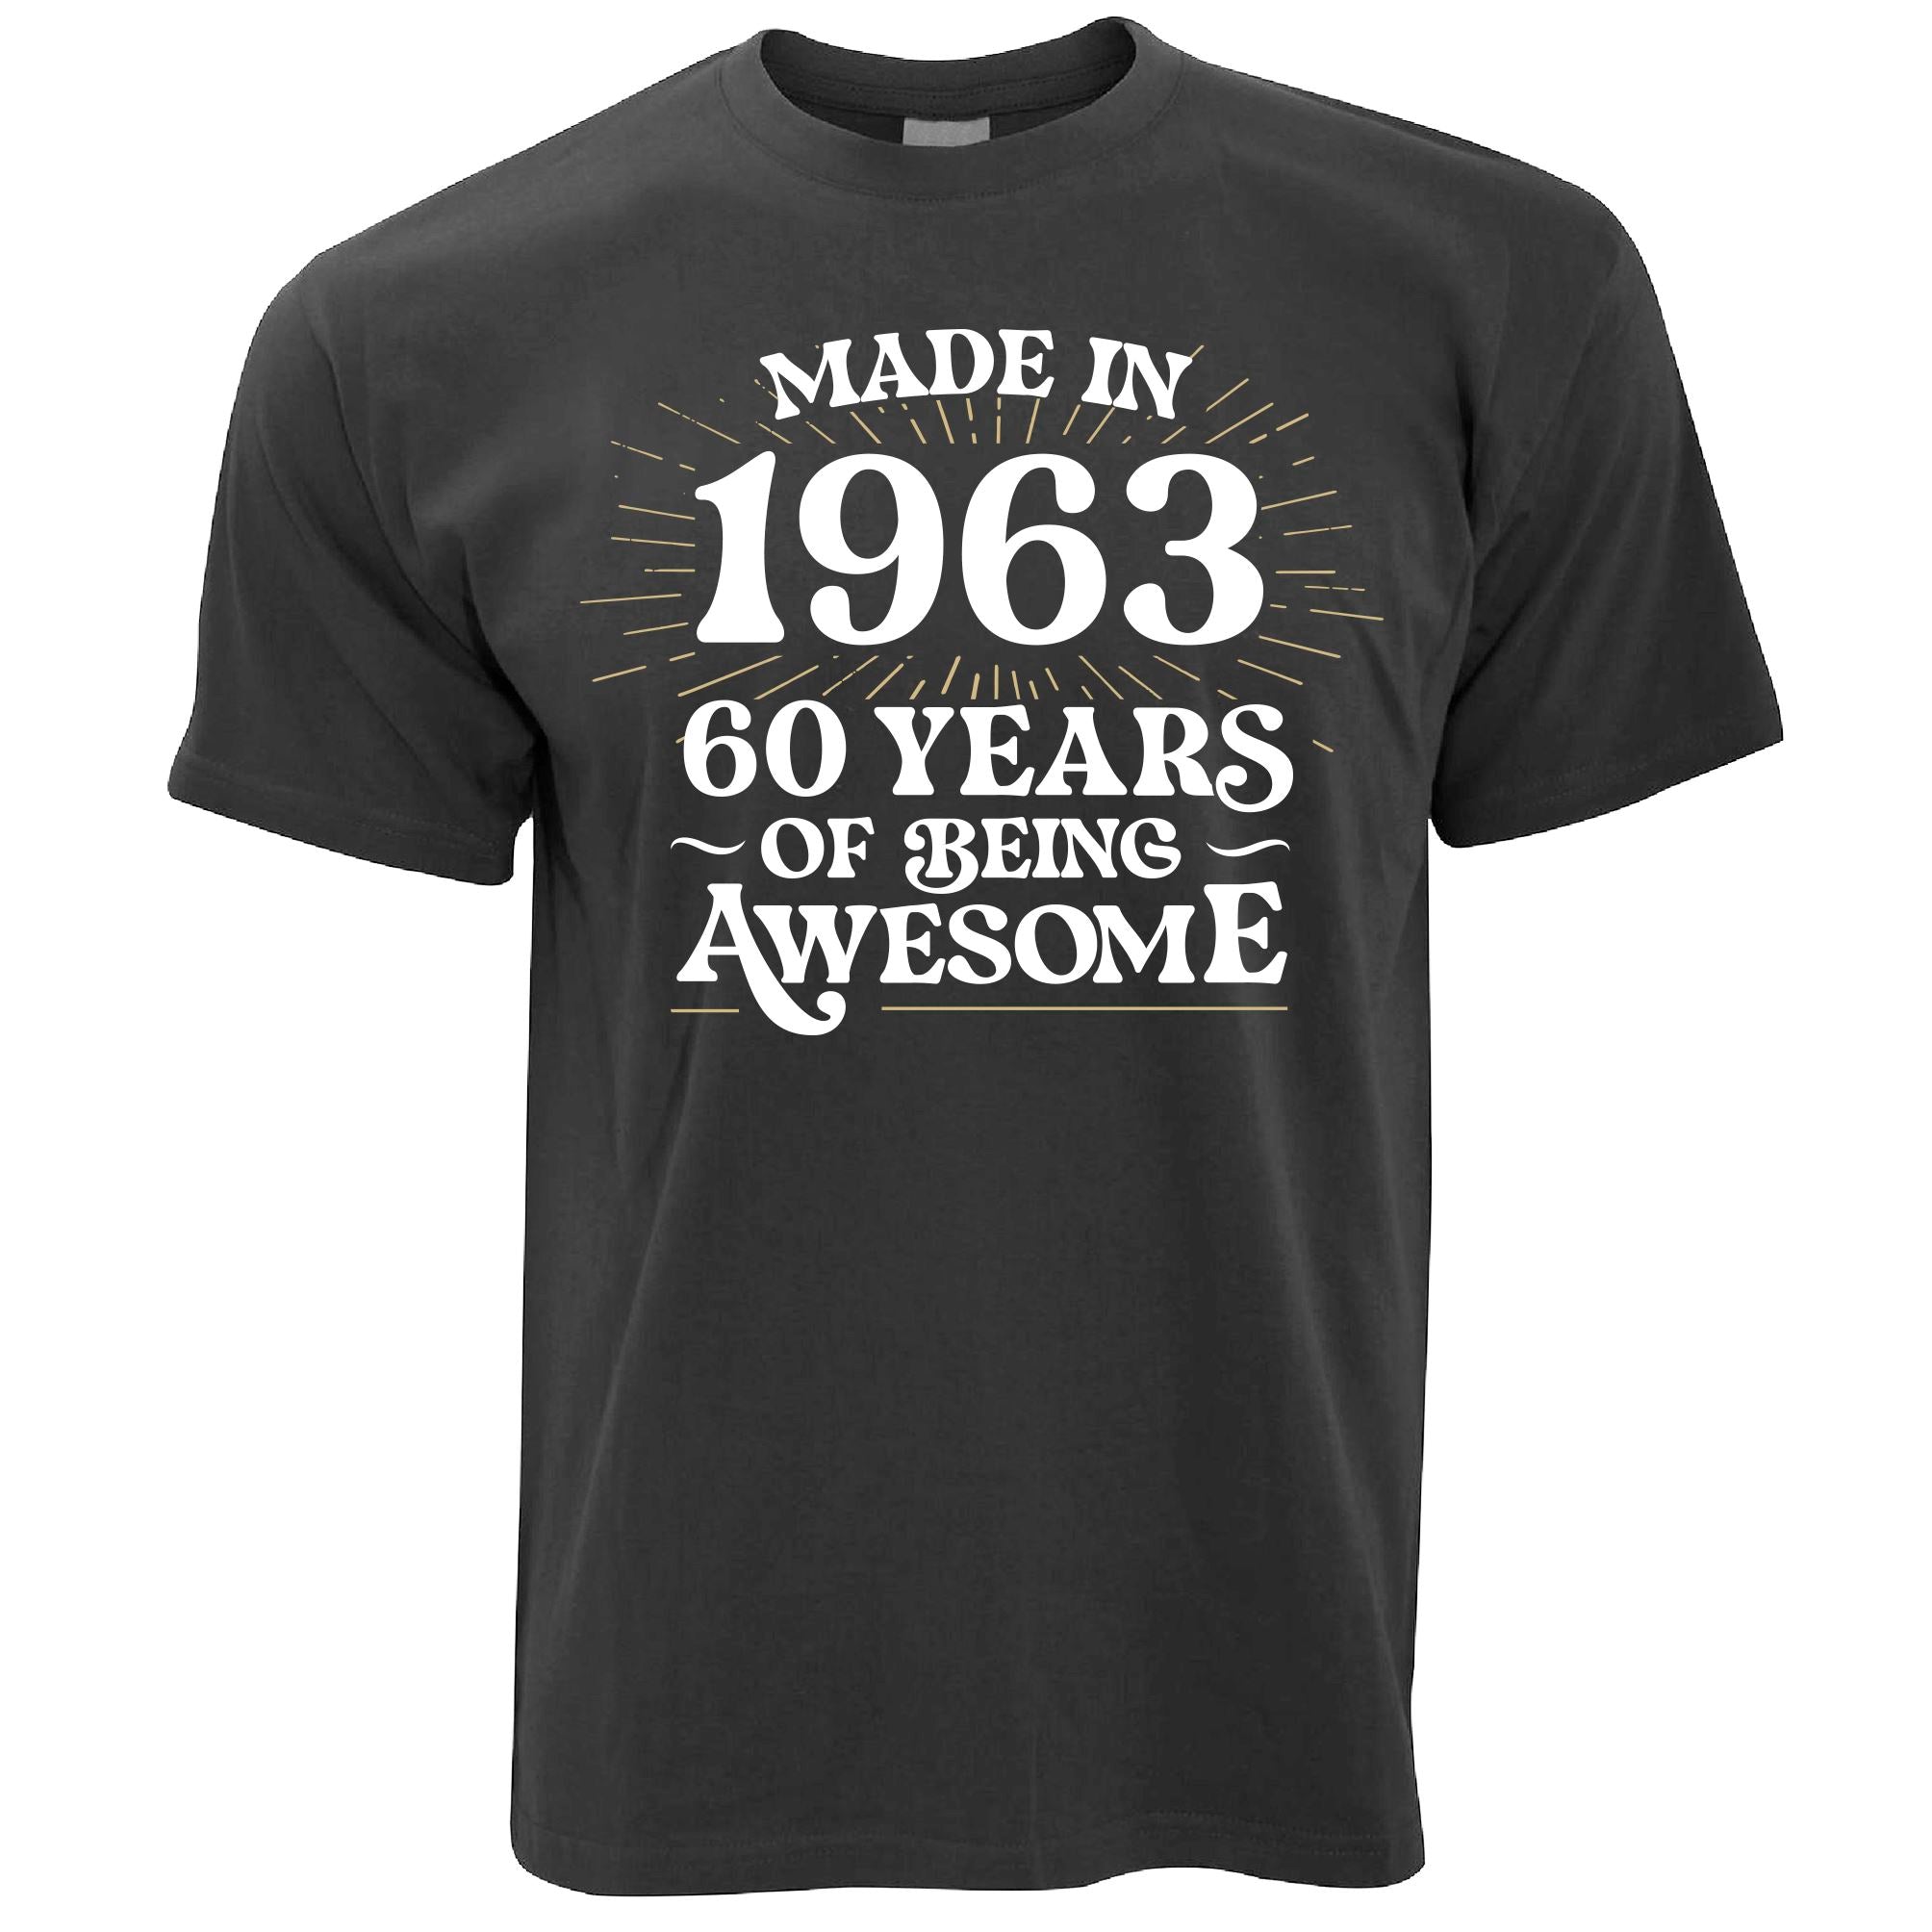 60th Birthday T Shirt Made in 1963 - 60 Awesome Years